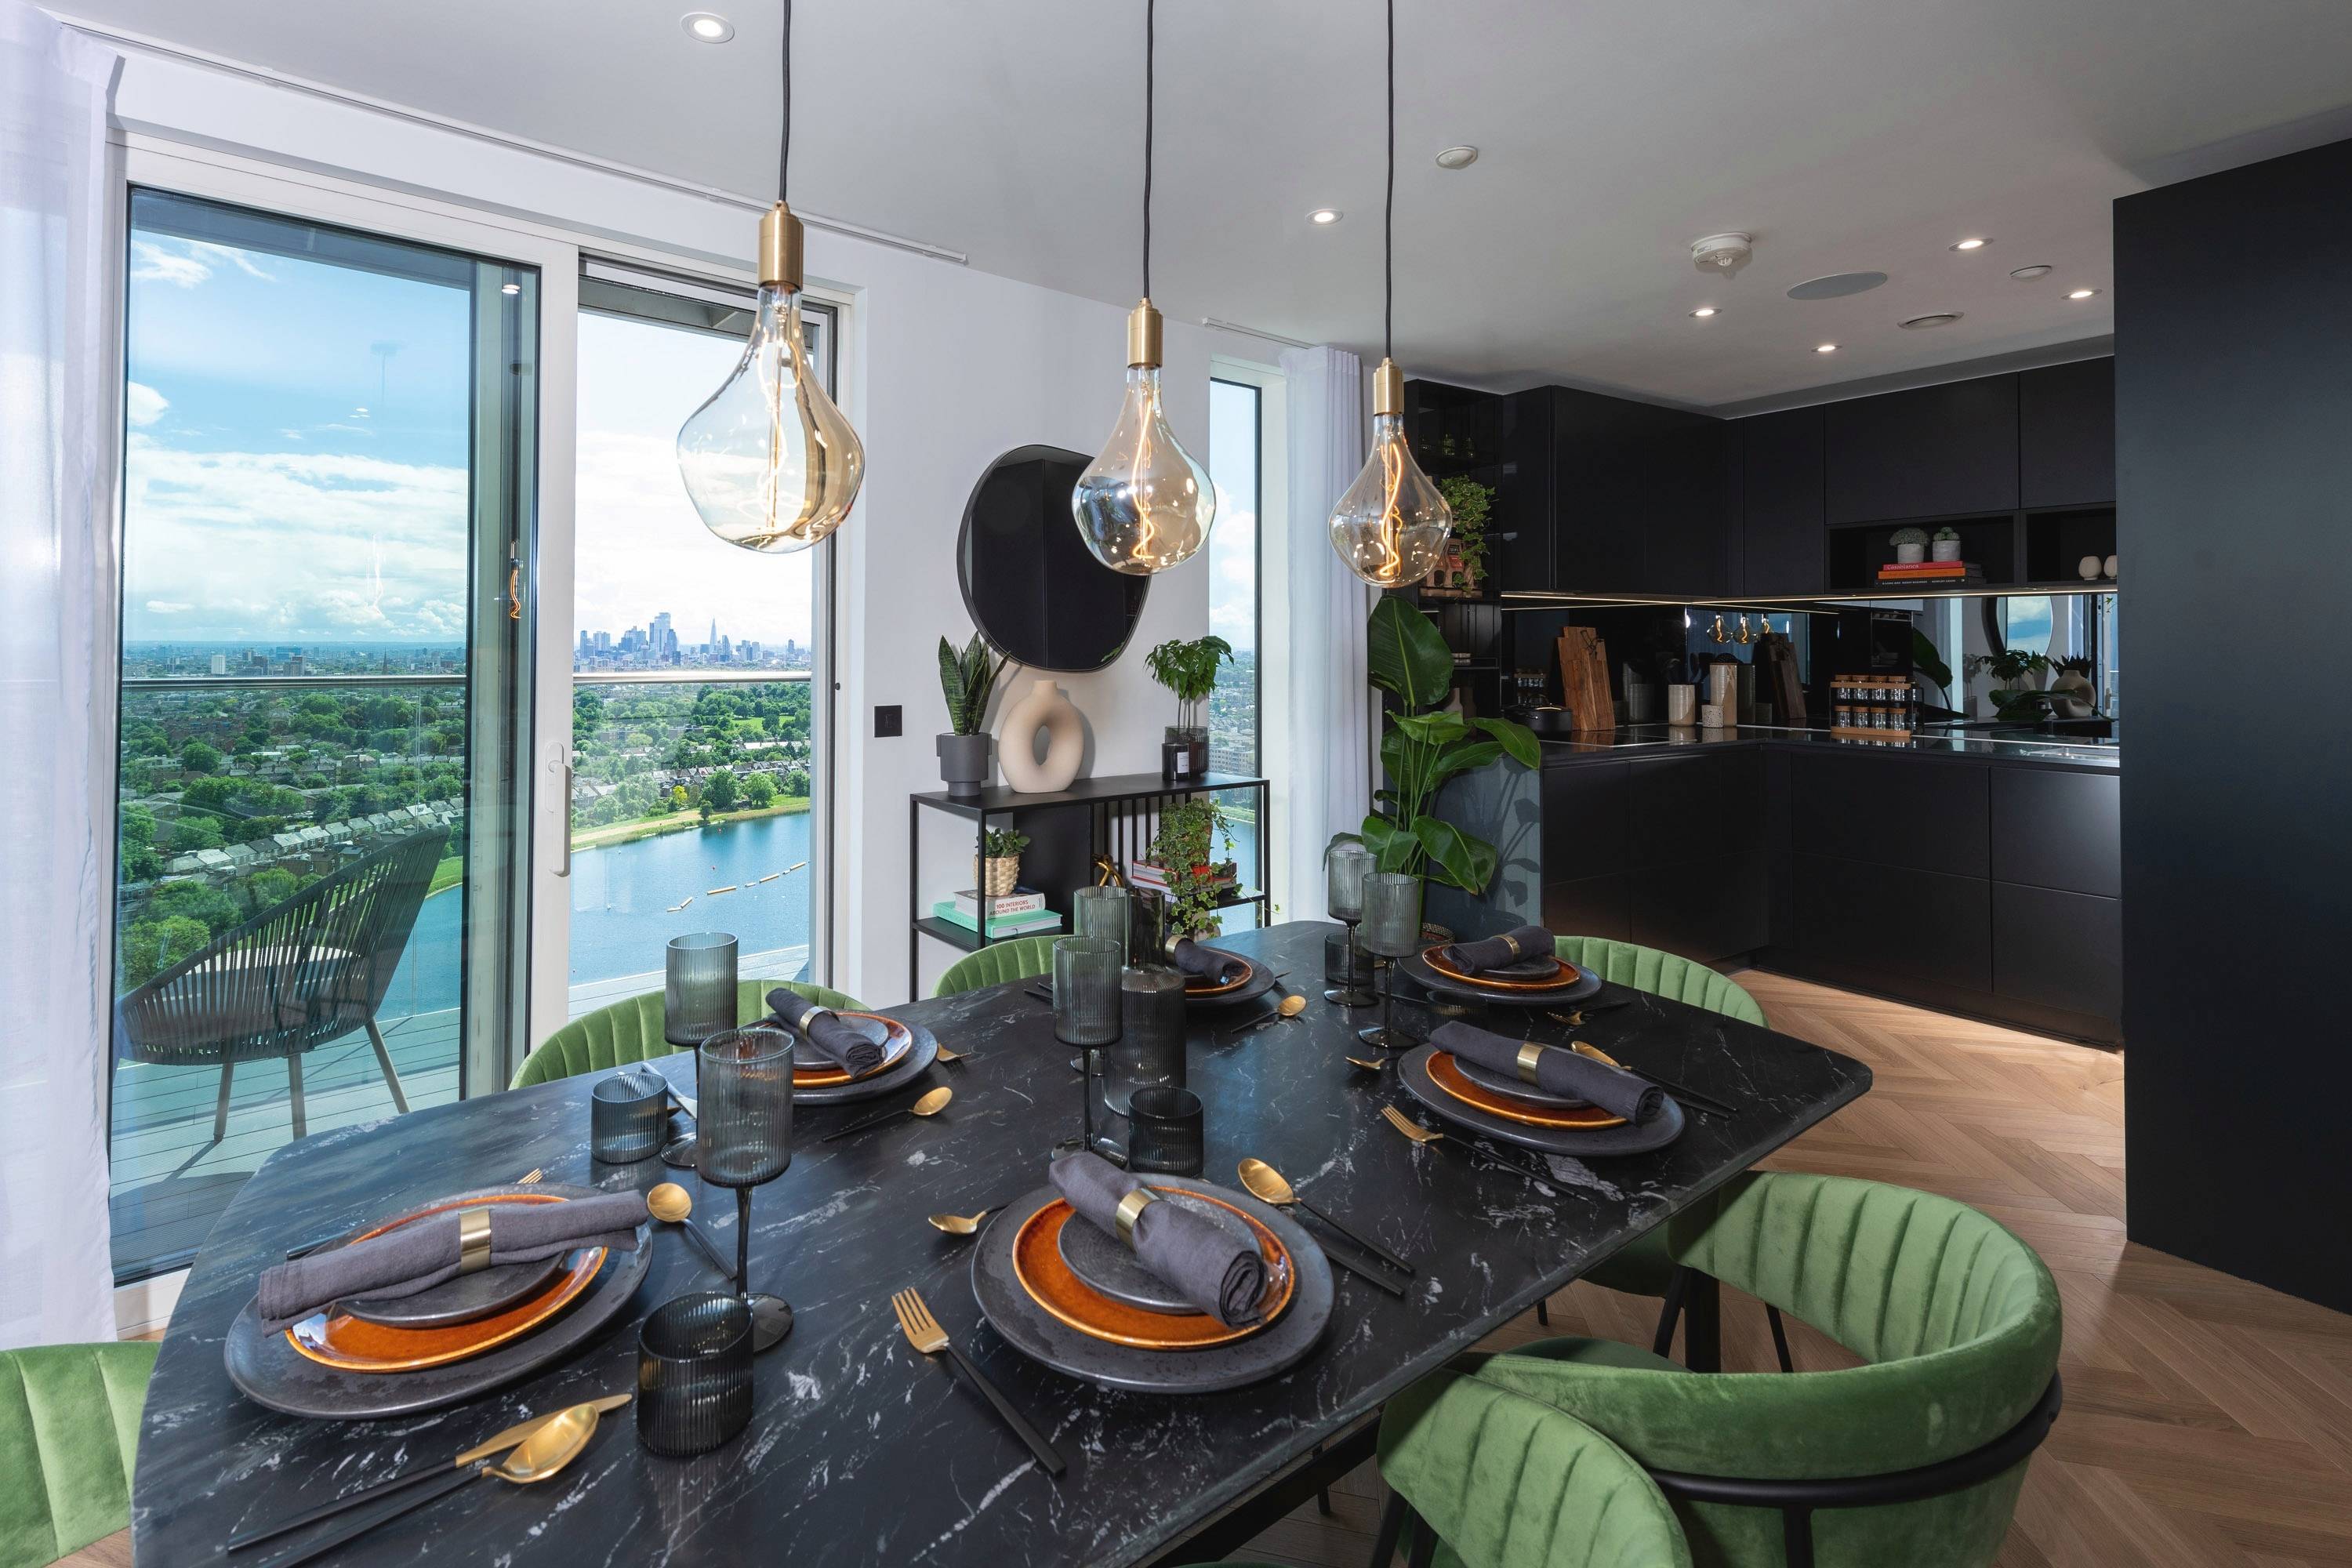 Hidden Oasis, 10 minutes from Central London -  Luxury 2-Bedroom Penthouse in a Stunning New Development Surrounded by Nature - Seventeenth Floor - Reservoirs and Garden Views